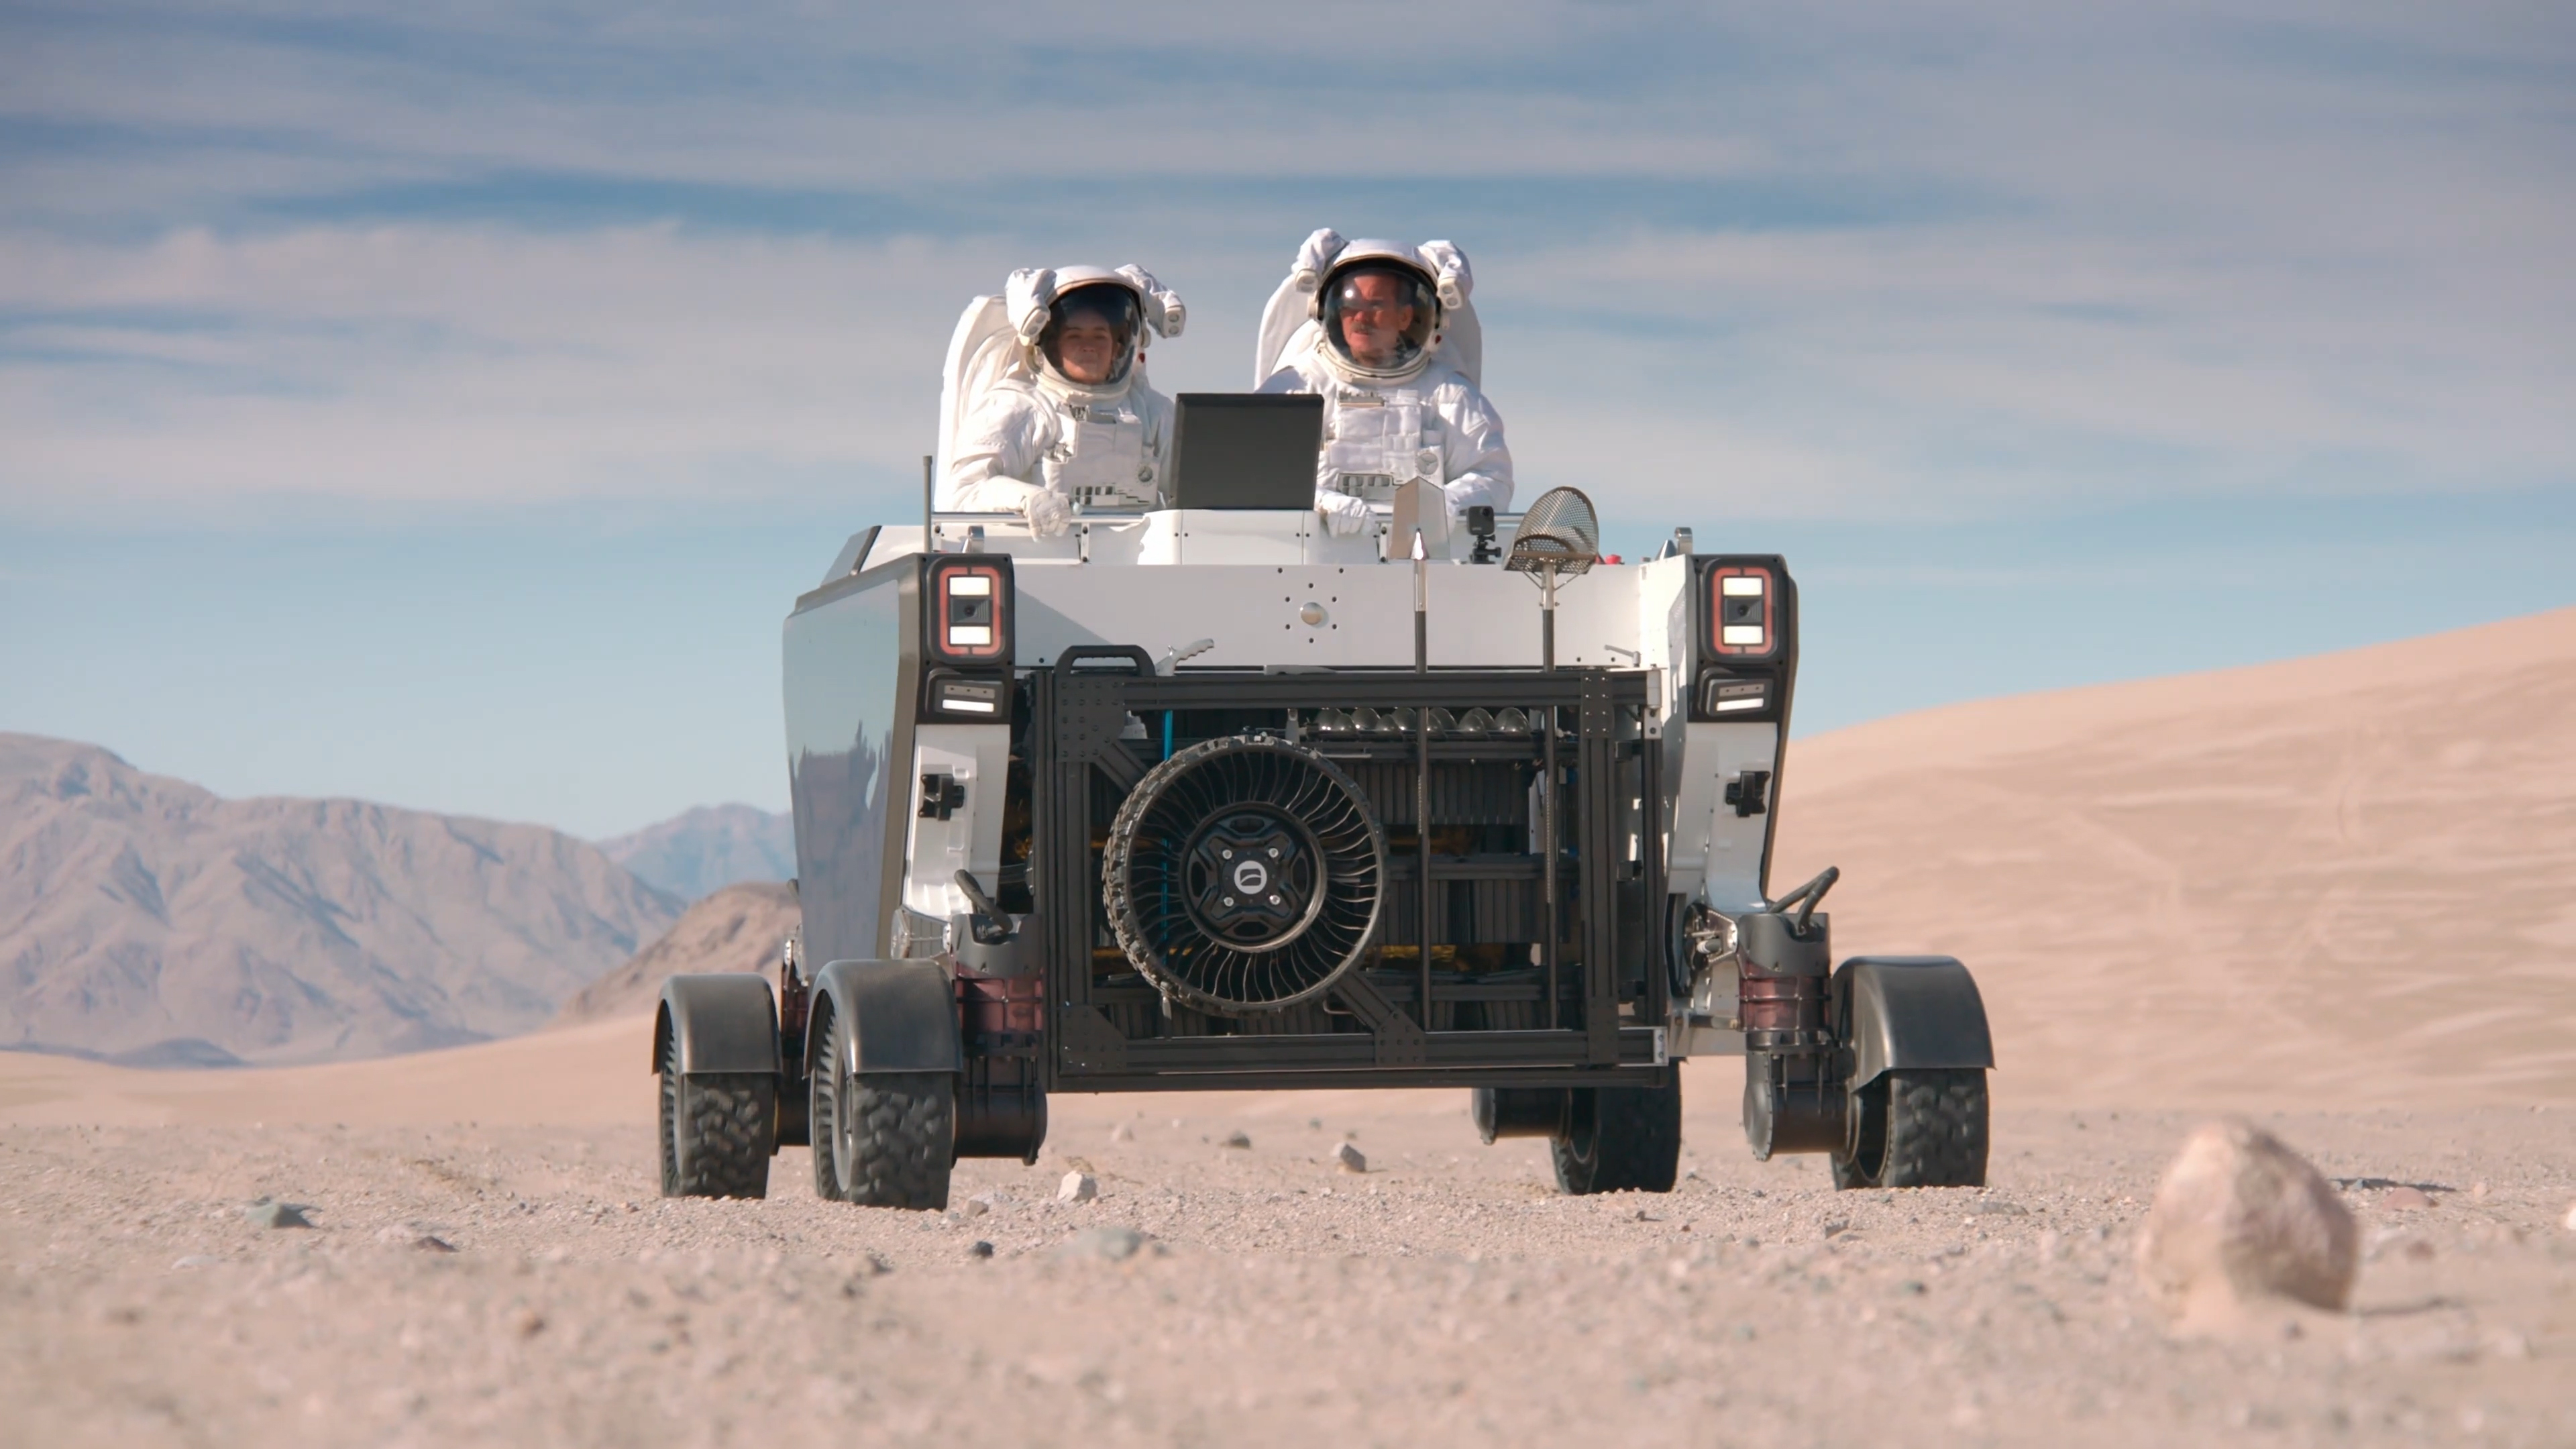 Chris Hadfield, retired NASA/CSA astronaut, is interviewed about Astrolab's FLEX rover.